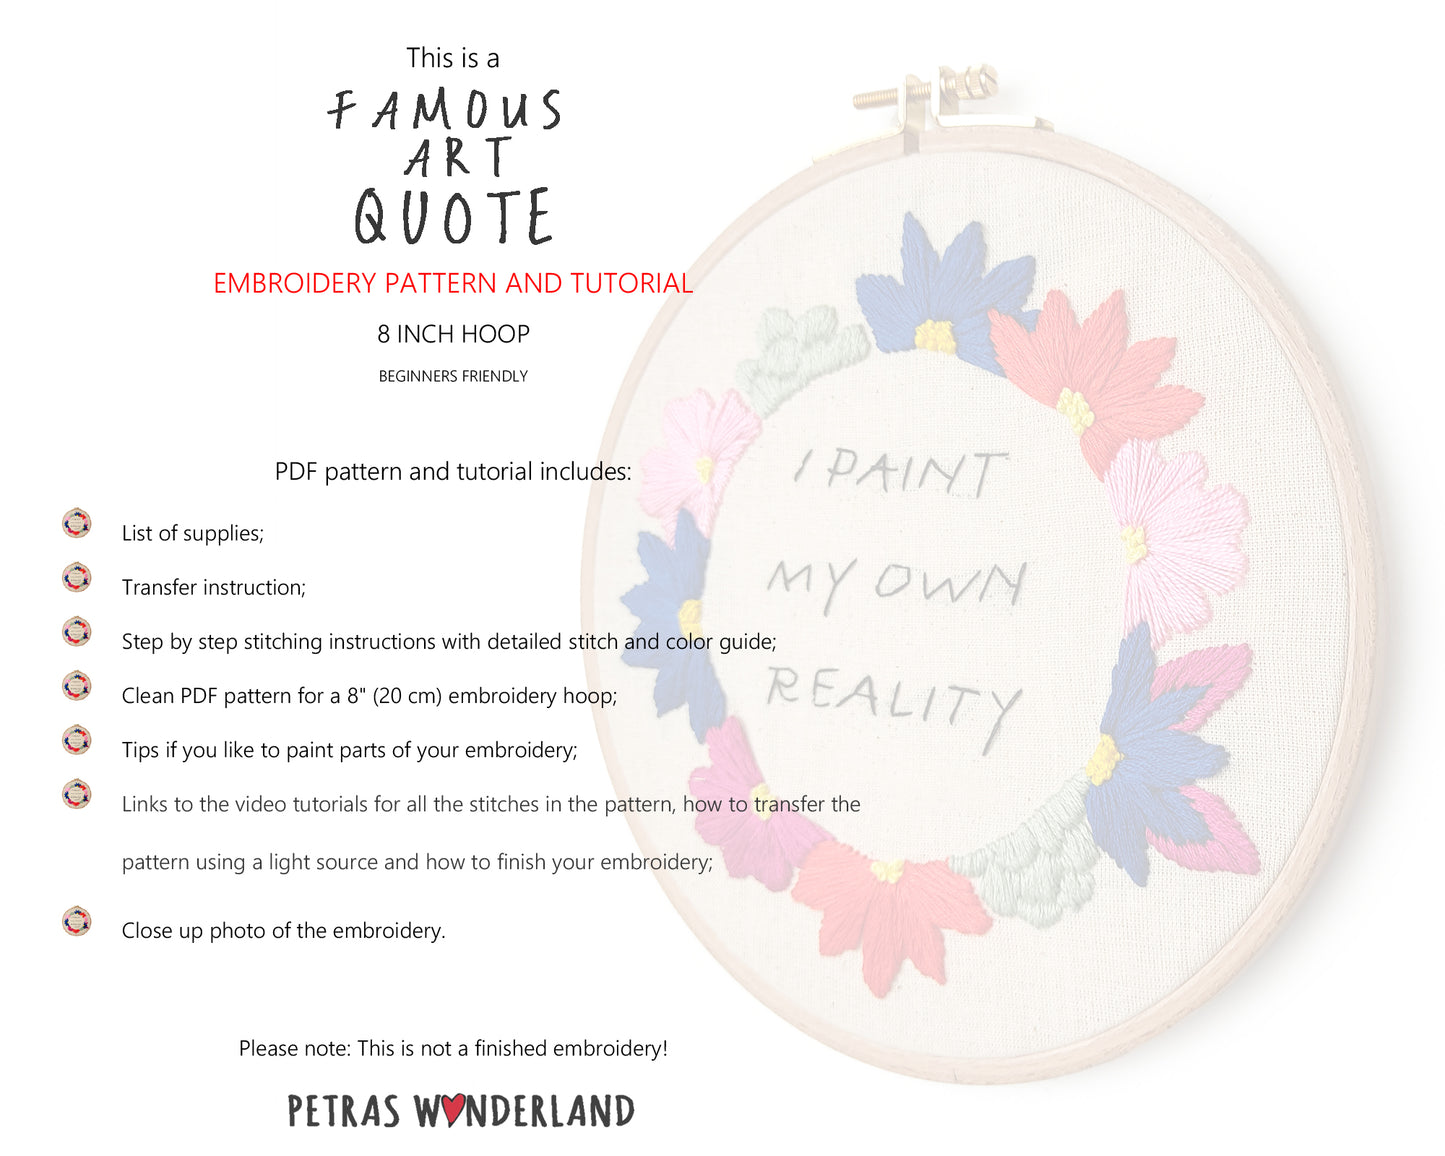 Famous Art Quote - PDF embroidery pattern and tutorial 10